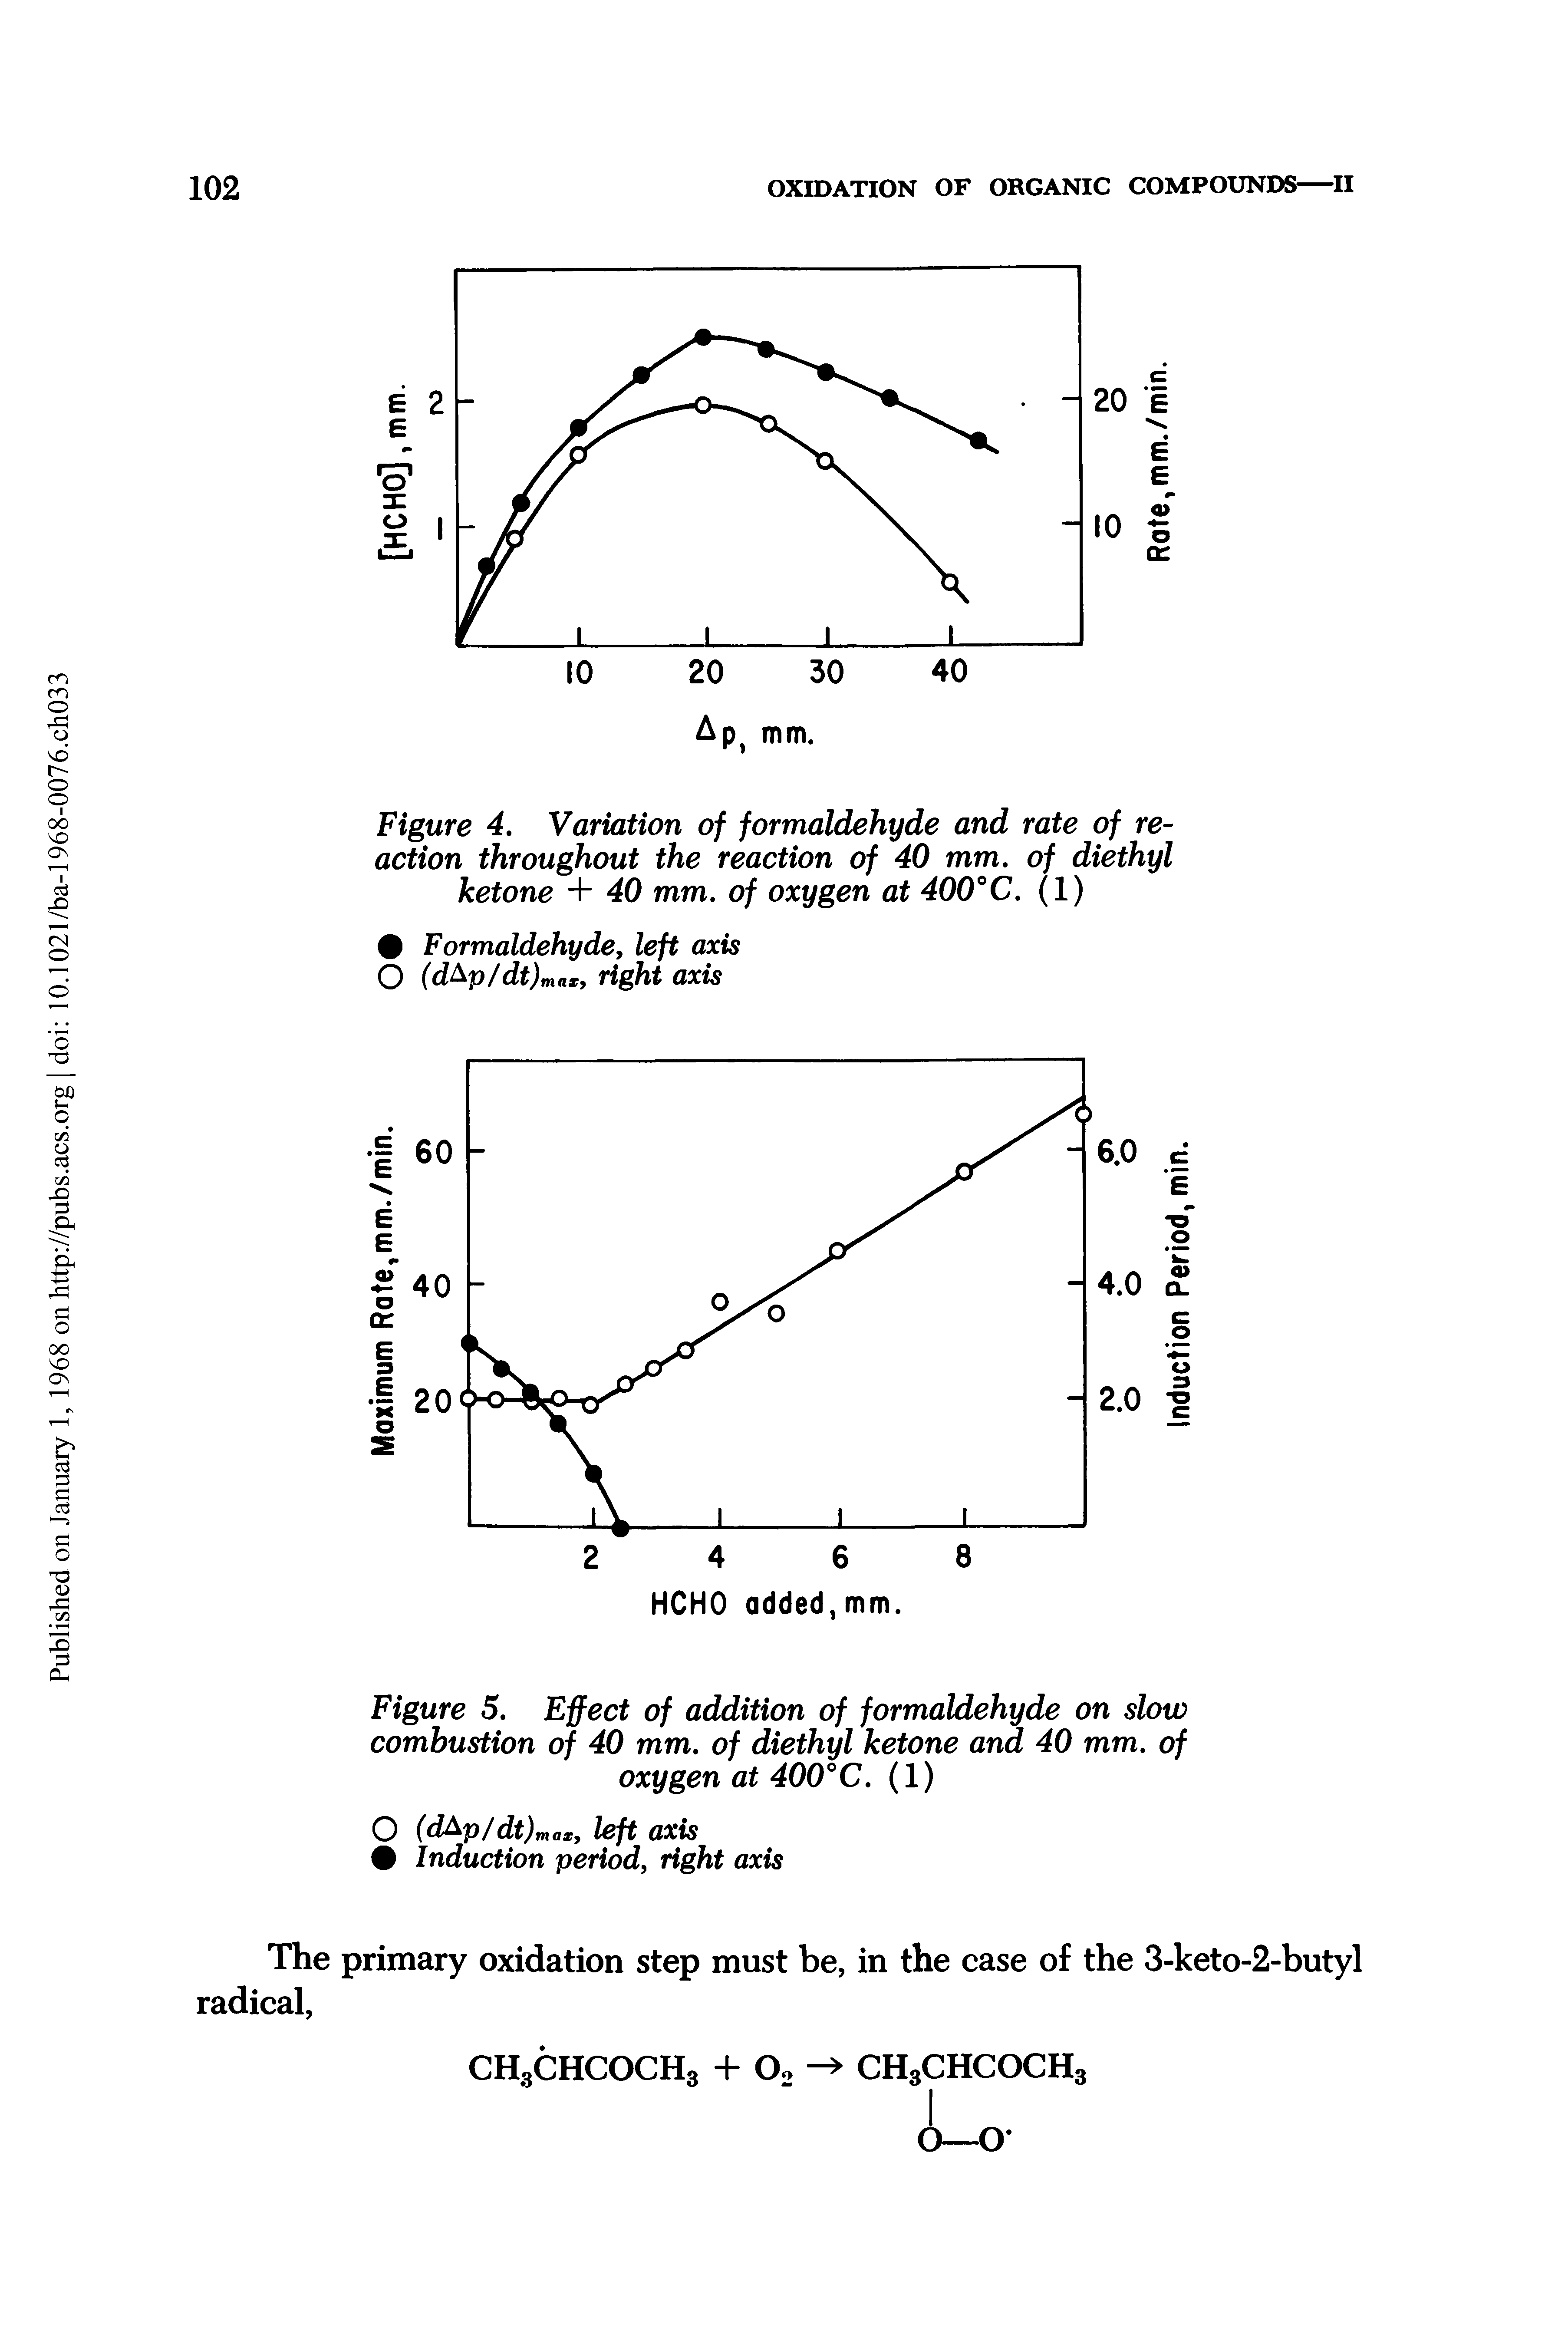 Figure 5. Effect of addition of formaldehyde on slow combustion of 40 mm. of diethyl ketone and 40 mm. of oxygen at 400°C. (1)...